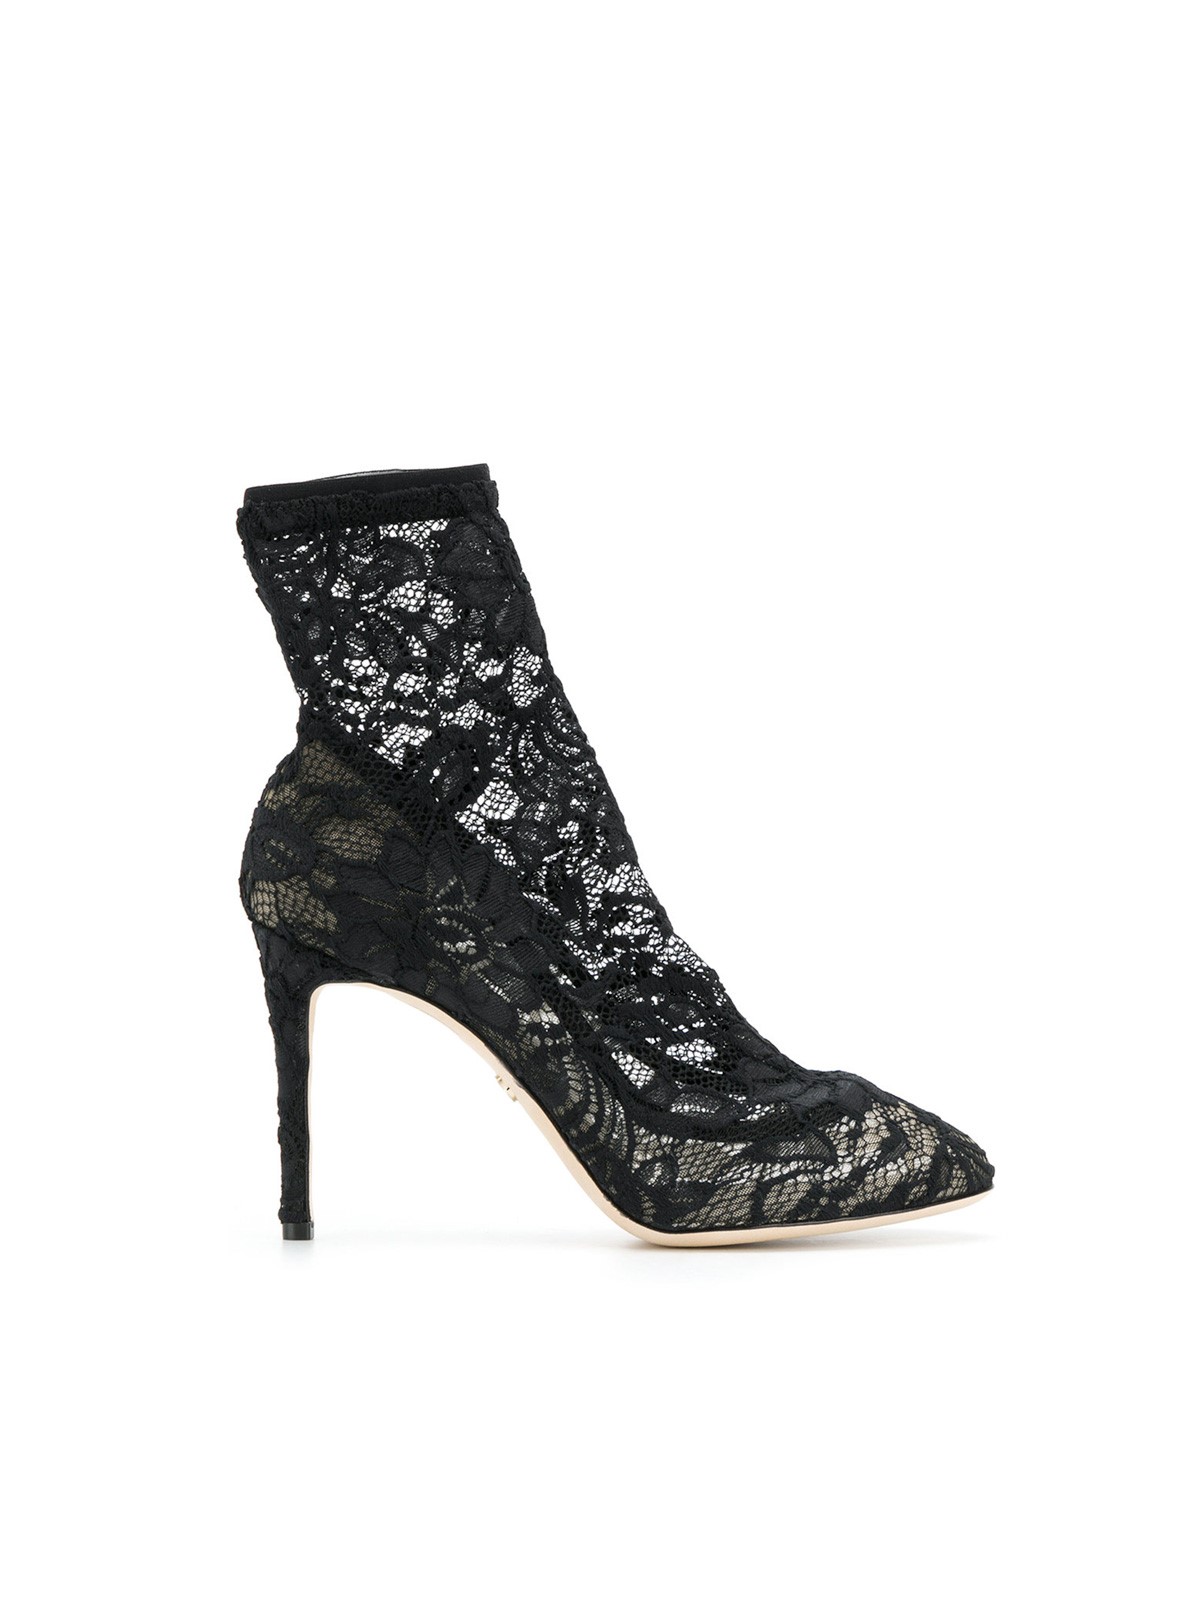 dolce & gabbana LACE ANKLE BOOTS available on montiboutique.com - 21911